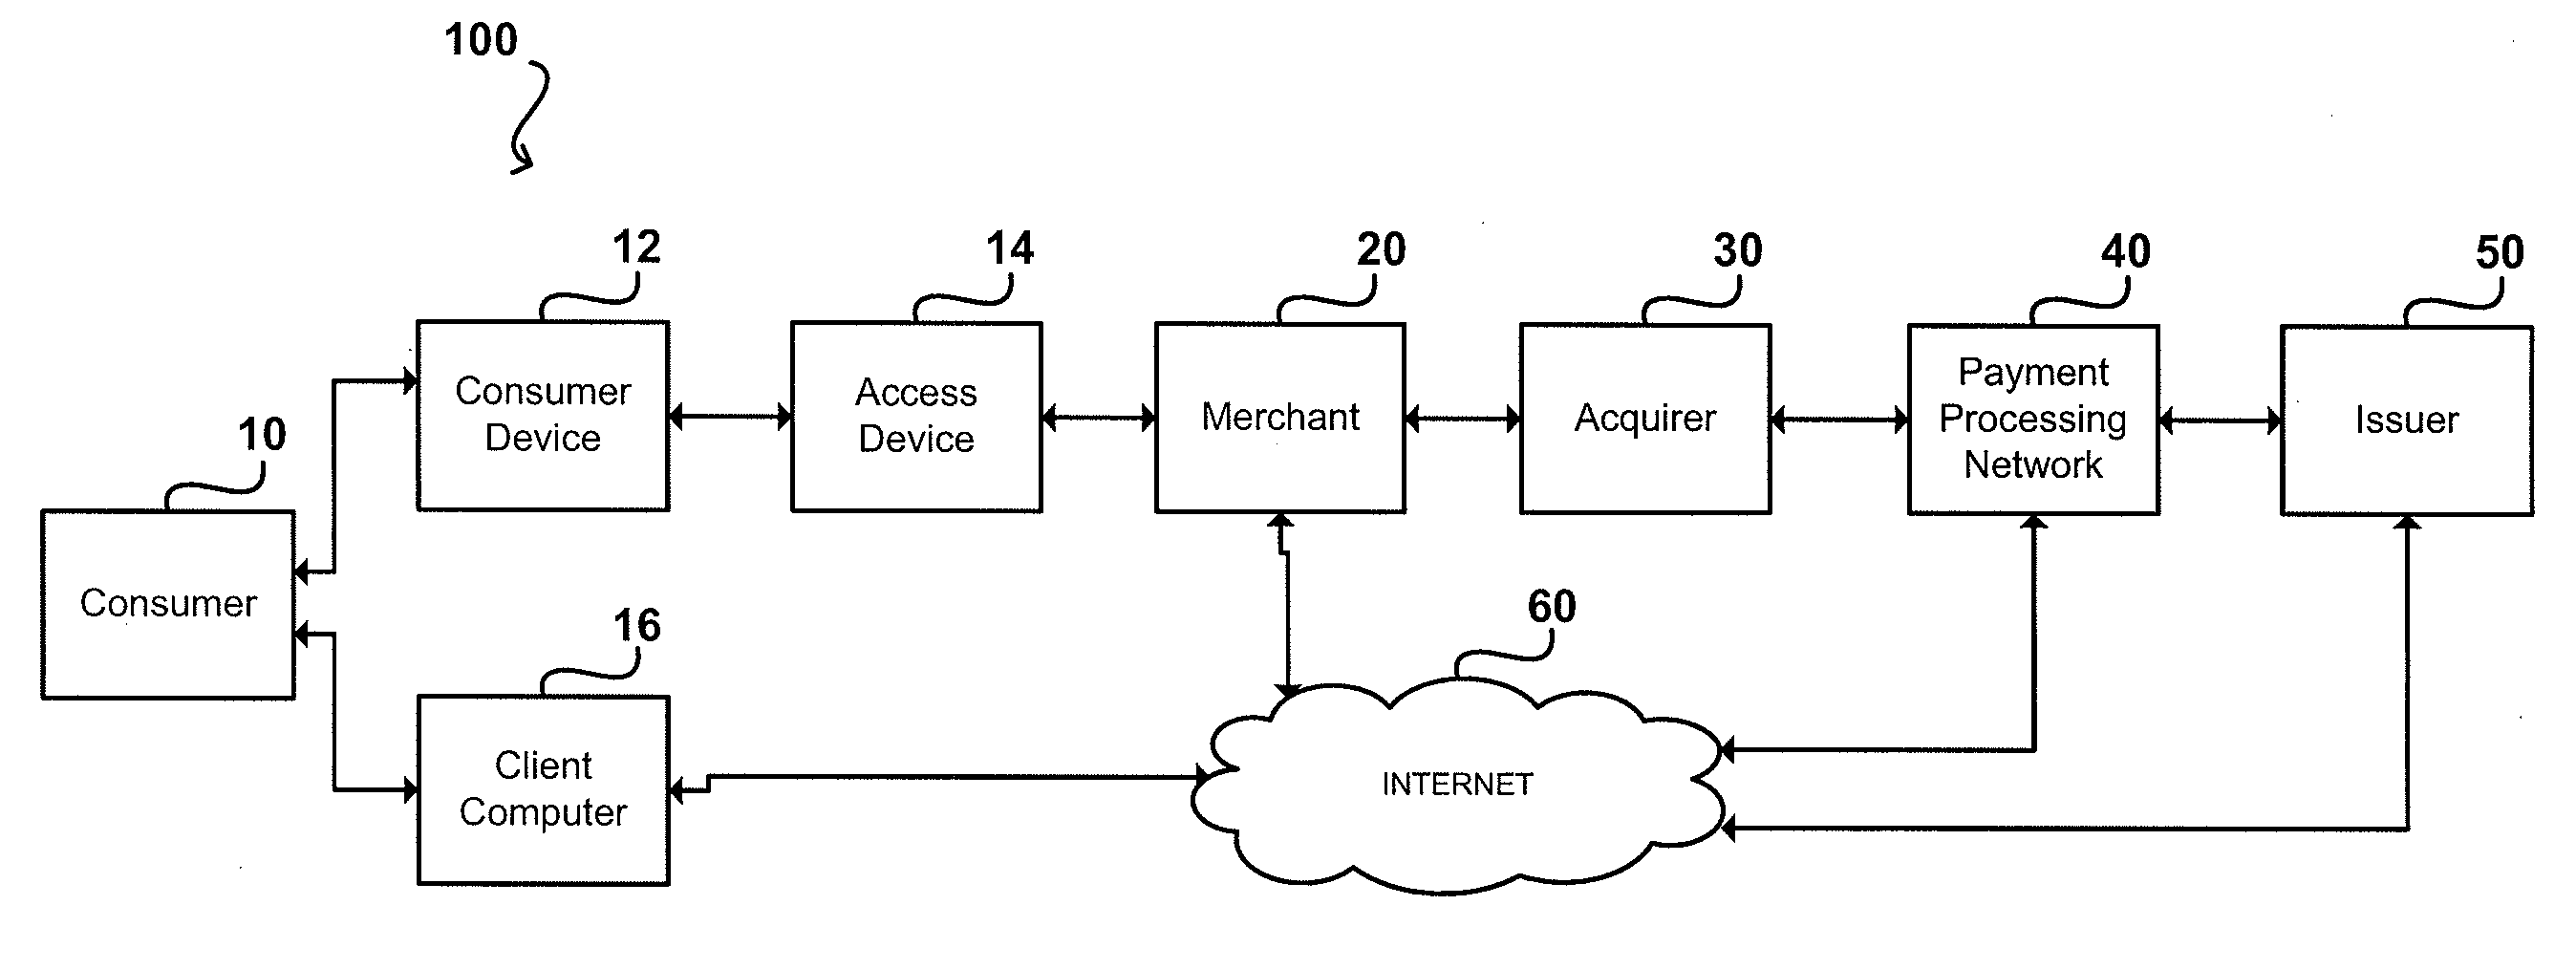 Method and System for Customizing Fraud Detection